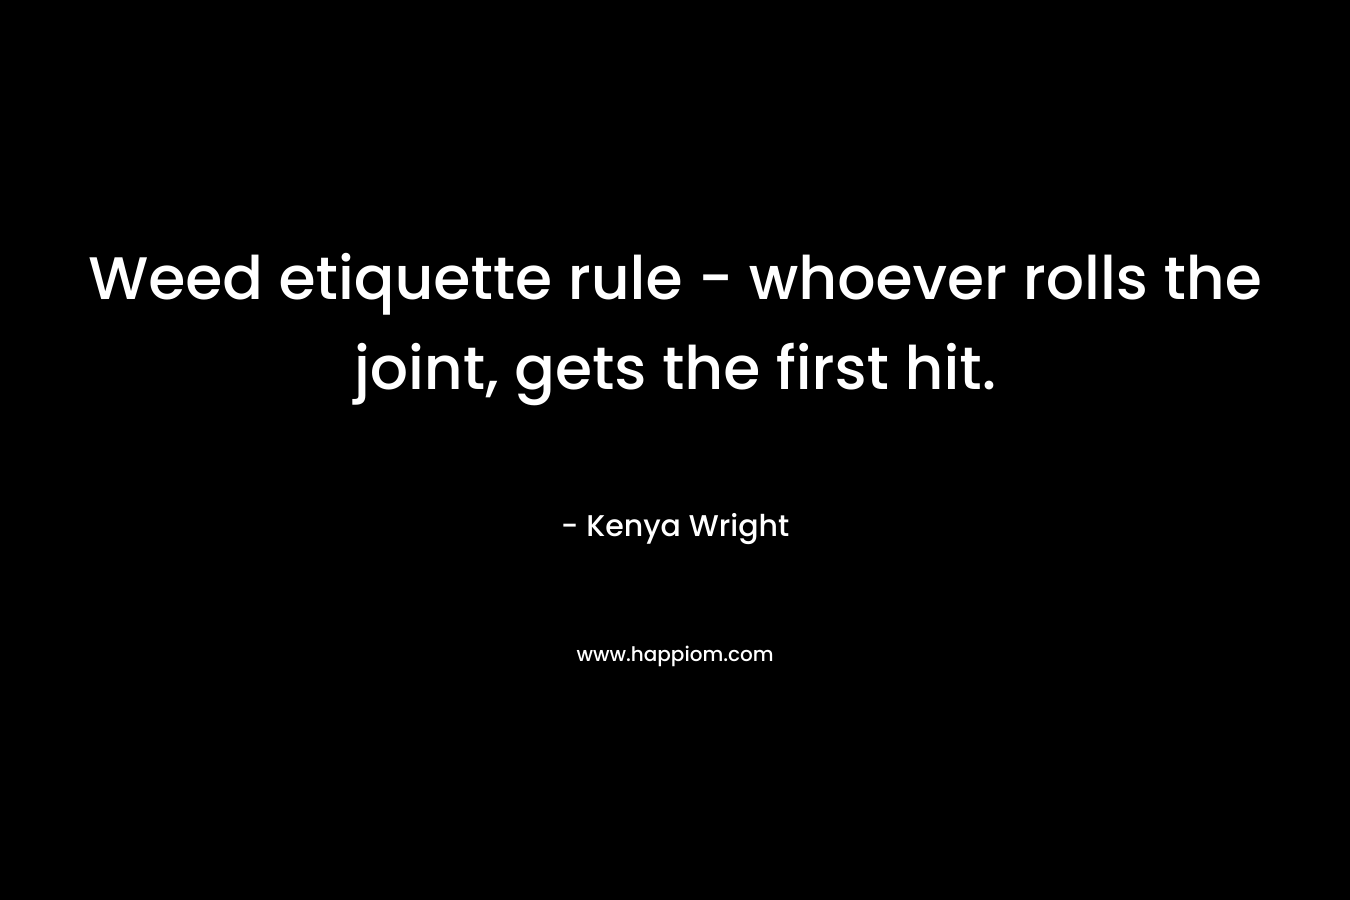 Weed etiquette rule - whoever rolls the joint, gets the first hit.